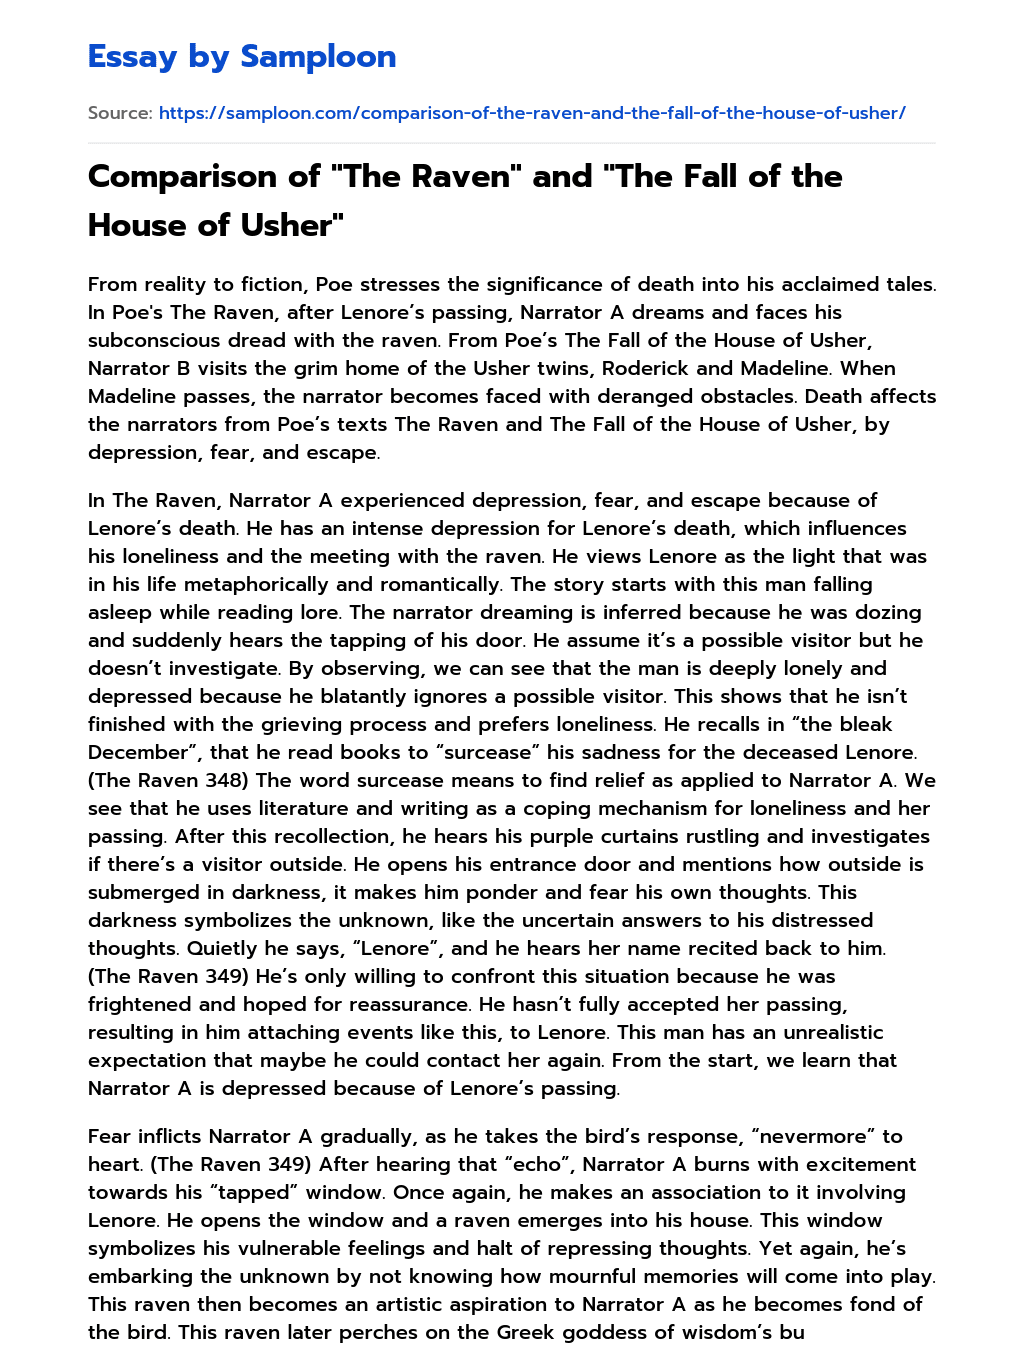 Comparison of “The Raven” and “The Fall of the House of Usher” essay